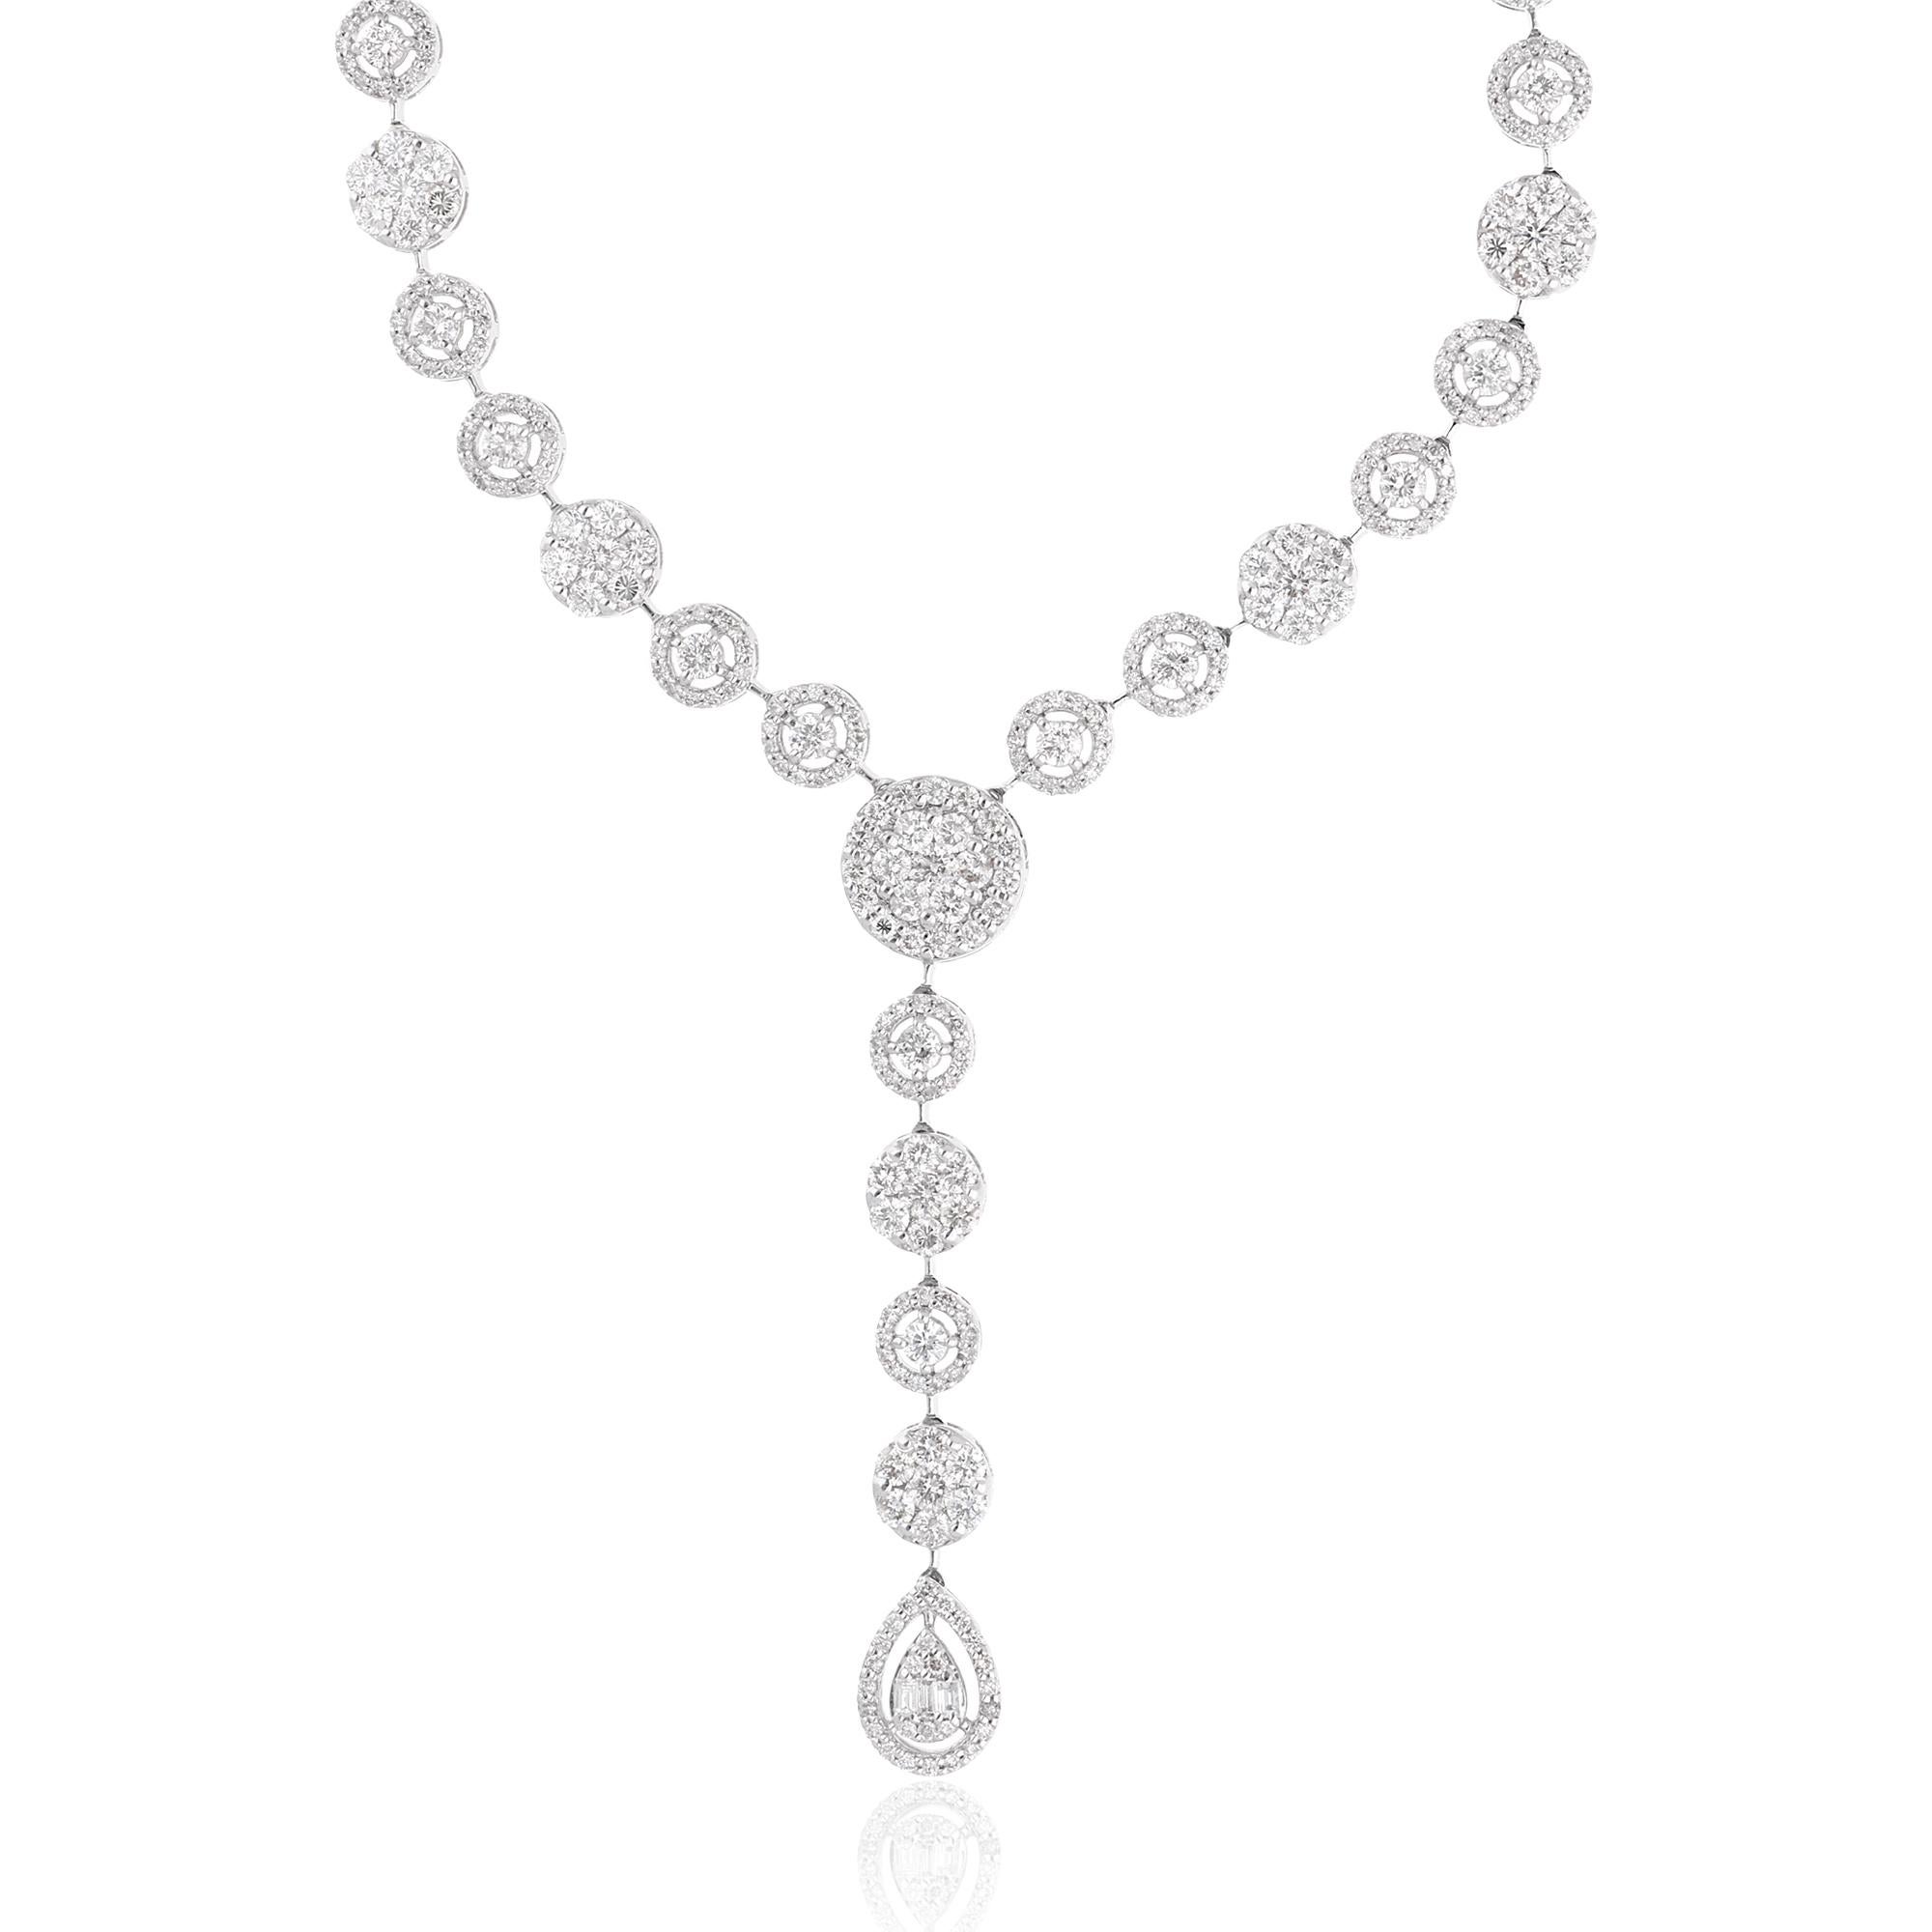 Elevate your jewelry collection with this extraordinary diamond lariat necklace. Its combination of the mesmerizing 7 carat diamond, the impeccable 18-karat white gold craftsmanship, and the lariat-style design make it a truly exceptional piece of